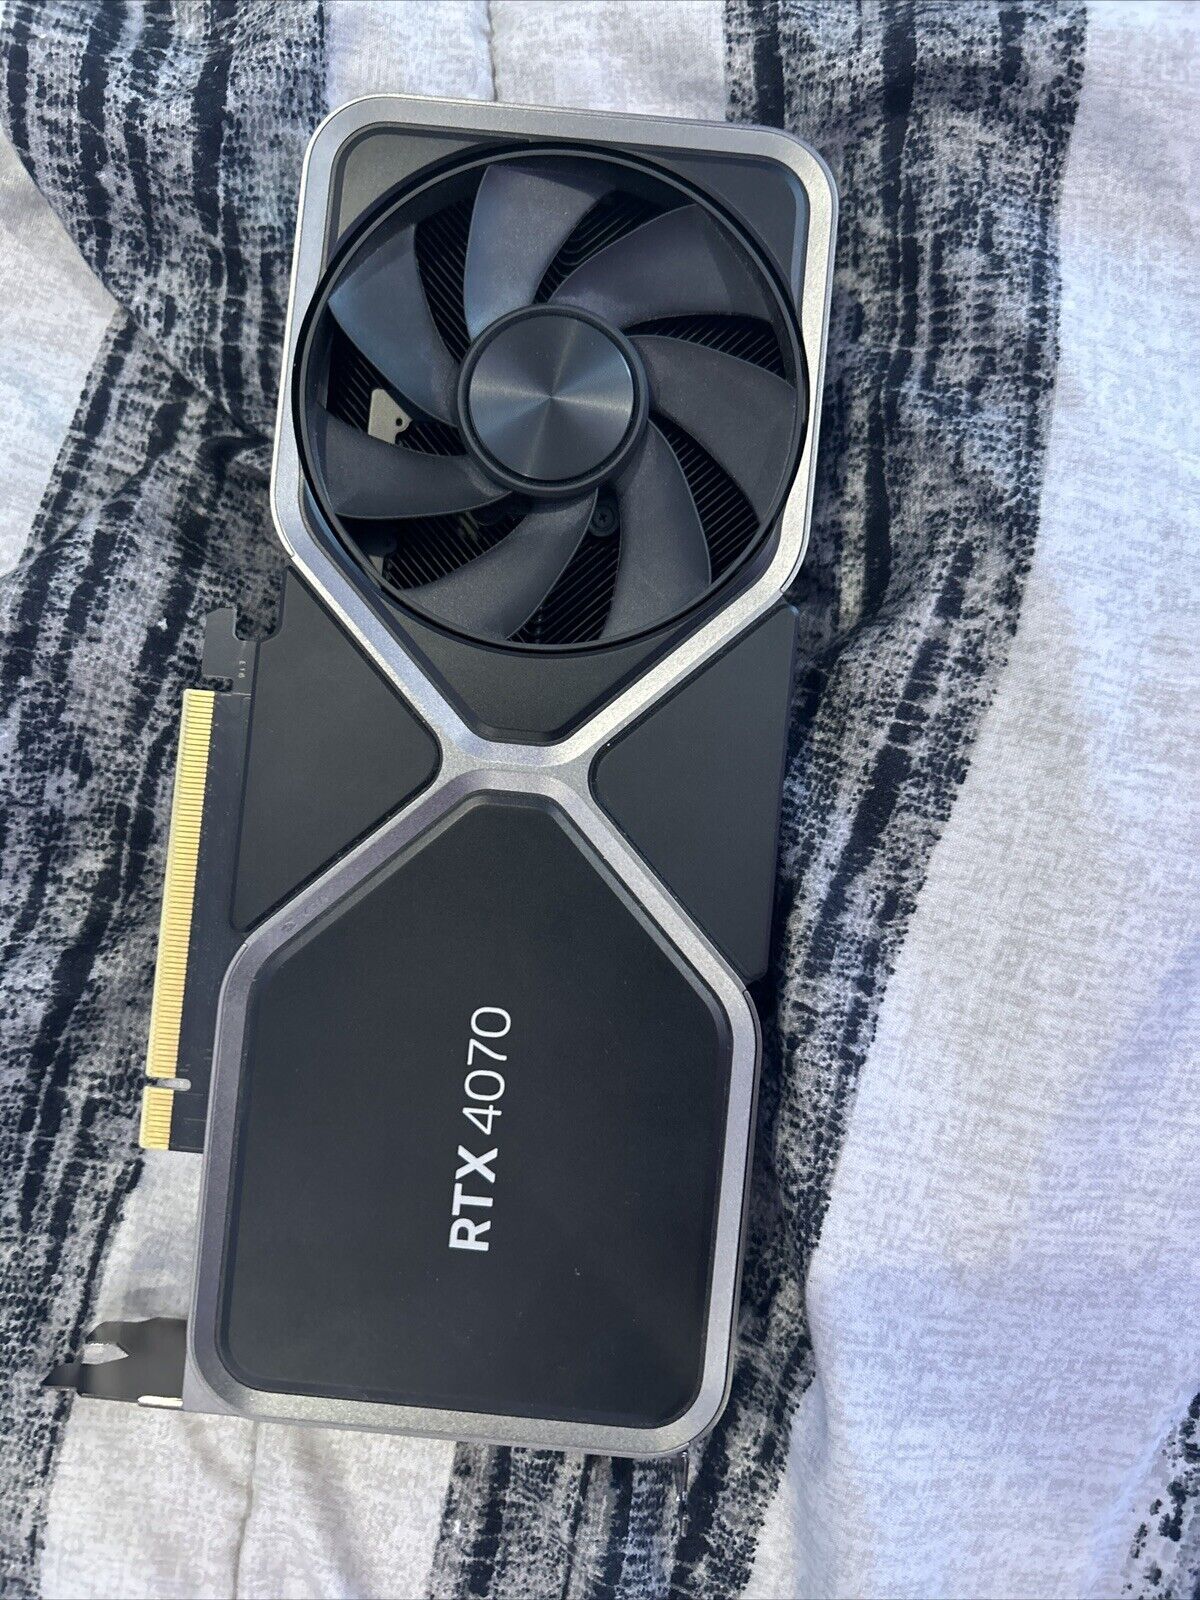 NVIDIA GeForce RTX 4070 Founders Edition 12GB Graphics Card